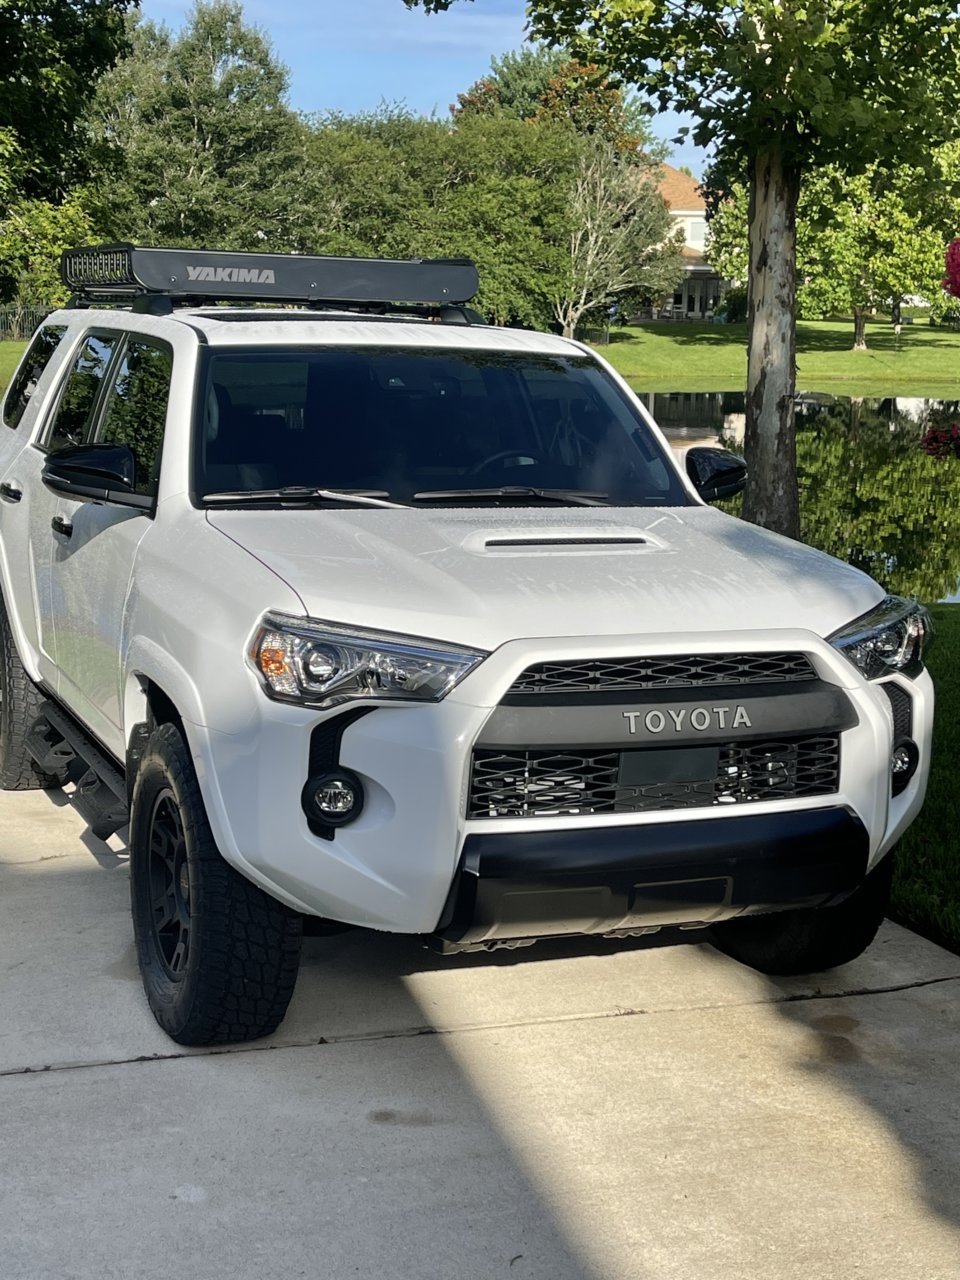 DIY: Clear Coating a TRD or any other grill